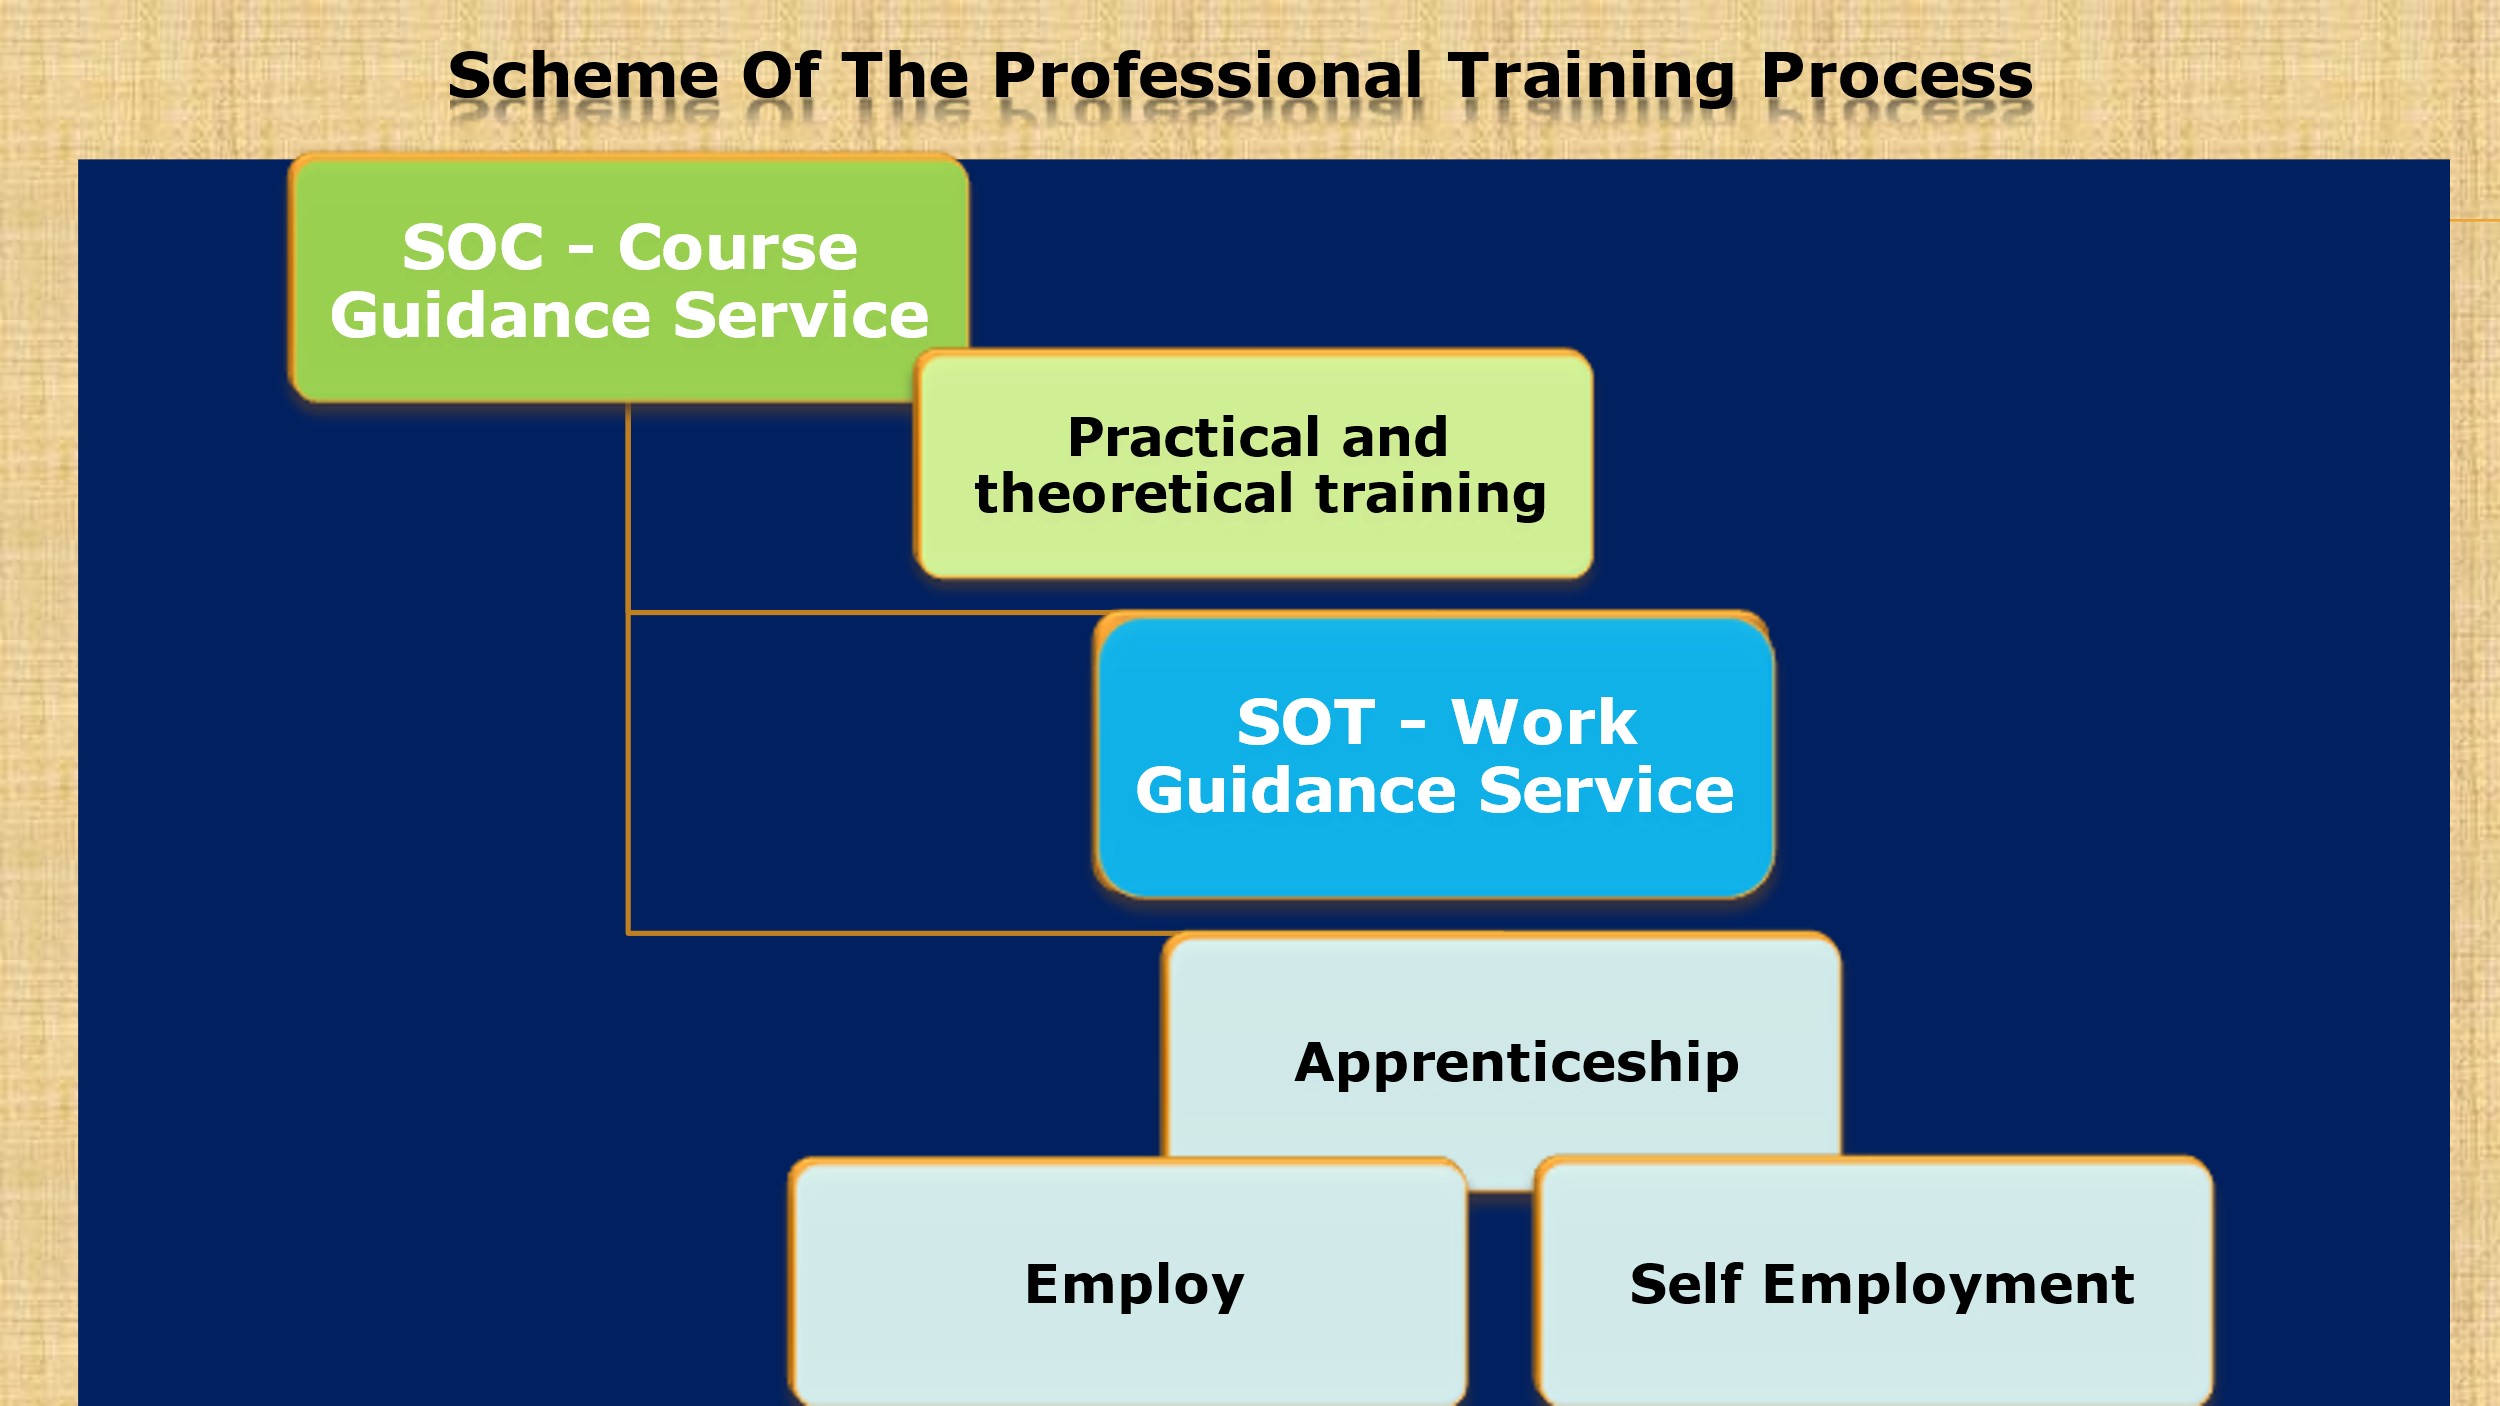 ASPYEE-The Initiative: The Route to Professional Skills training